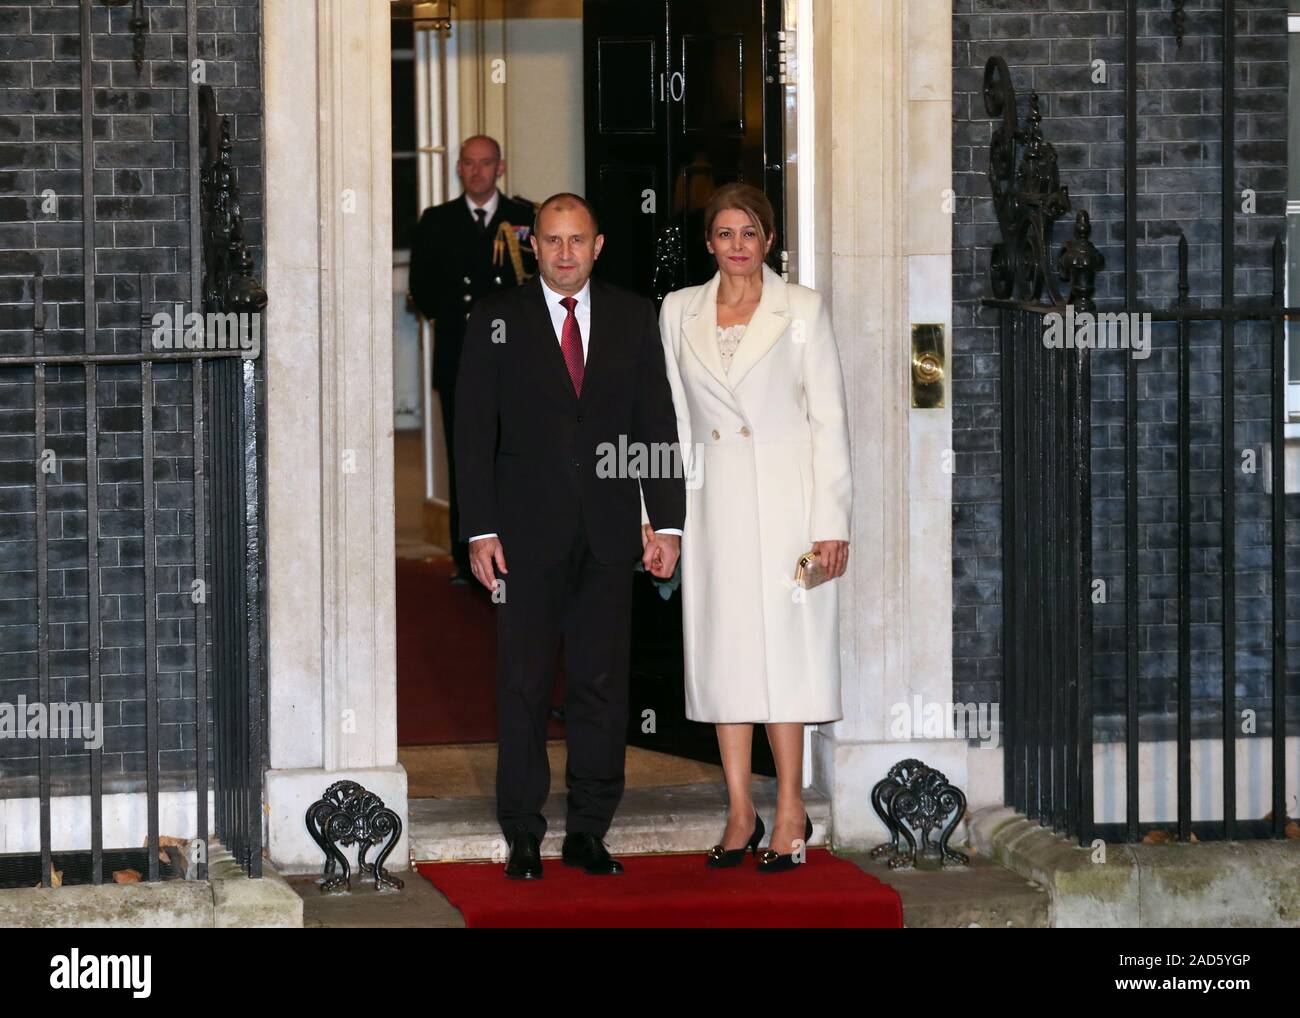 President of the Republic of Bulgaria Rumen Radev and his wife Desislava  Radeva arrive for an evening reception for Nato leaders hosted by Prime  Minister Boris Johnson at 10 Downing Street London,